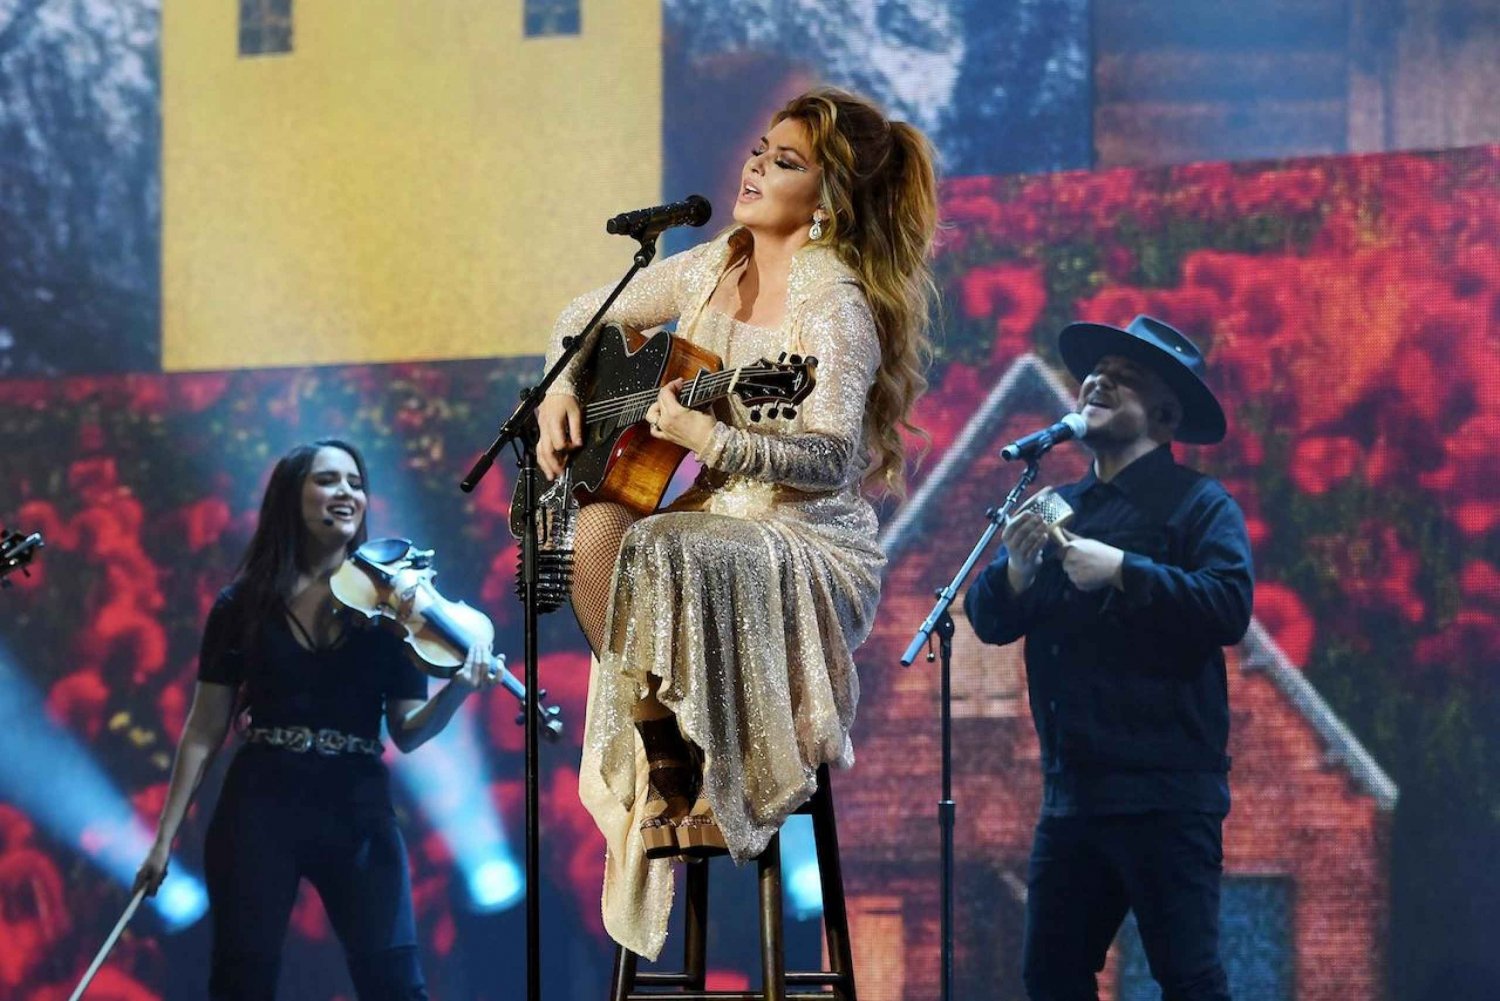 Las Vegasissa: Shania Twain Come On Over Residency Show